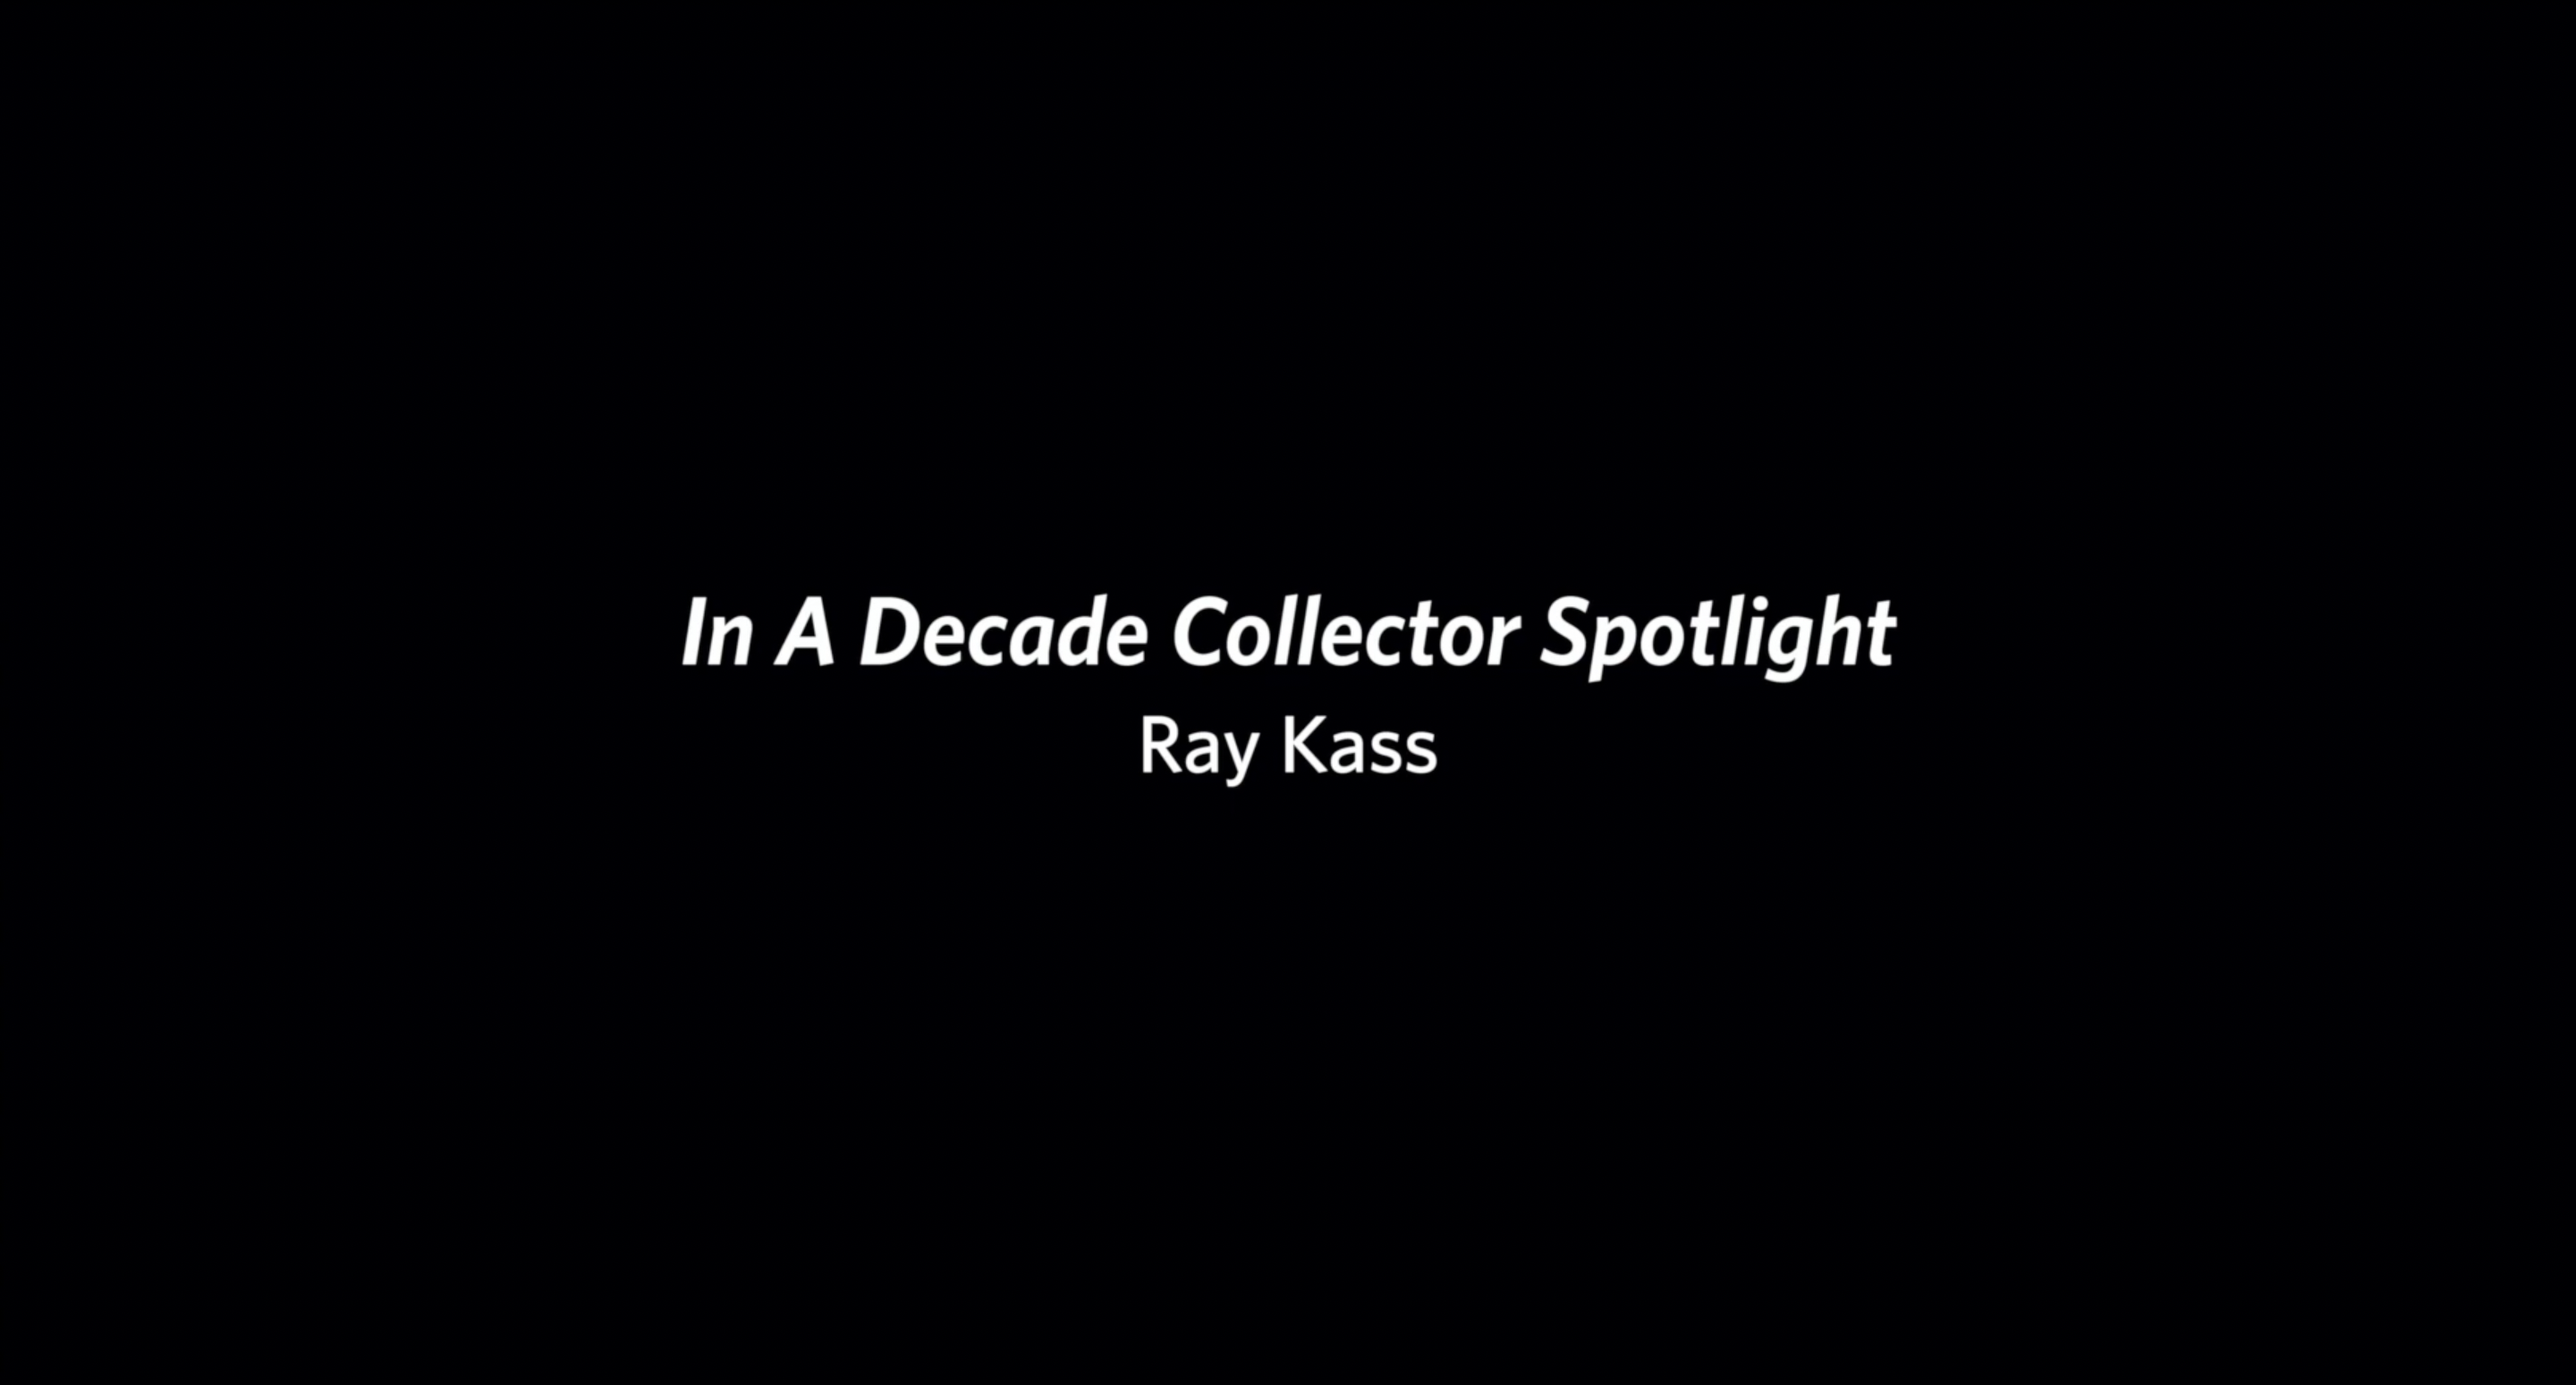 In a Decade Collector Spotlight: Ray Kass